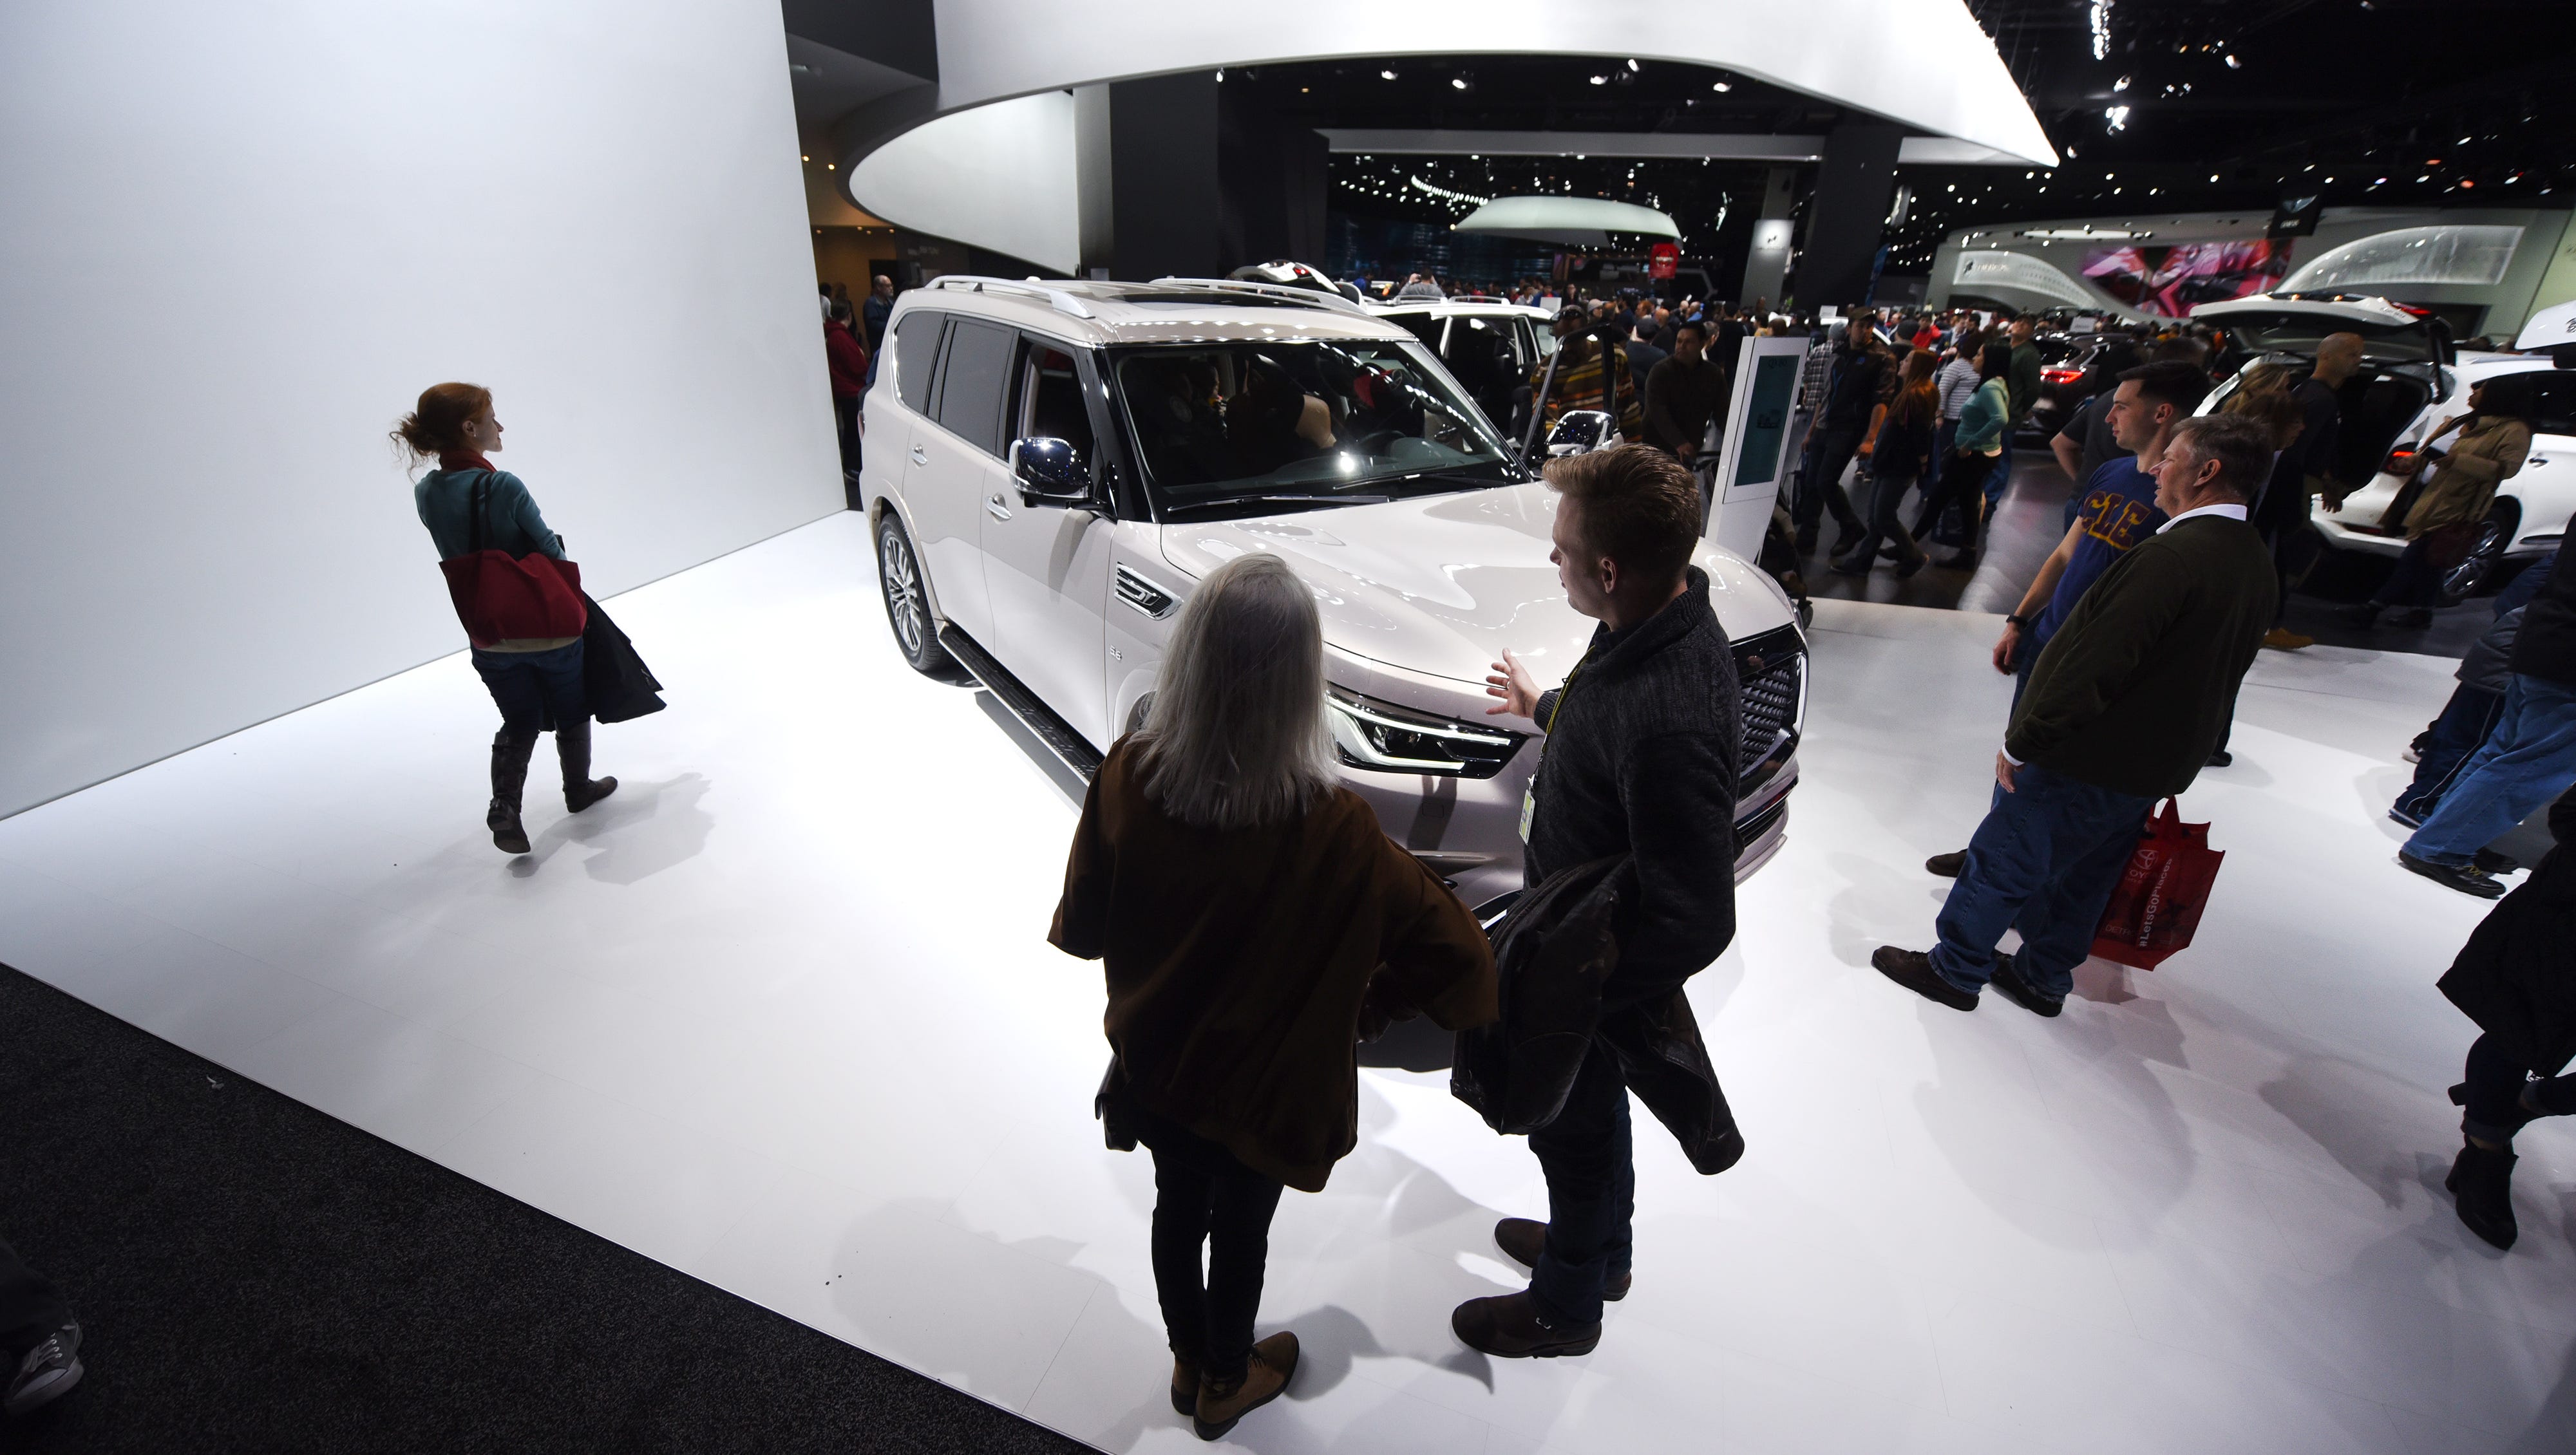 People surround the Infinity 2018 QX80 on Saturday January 20, 2018 for the first public day for the North American International Auto Show